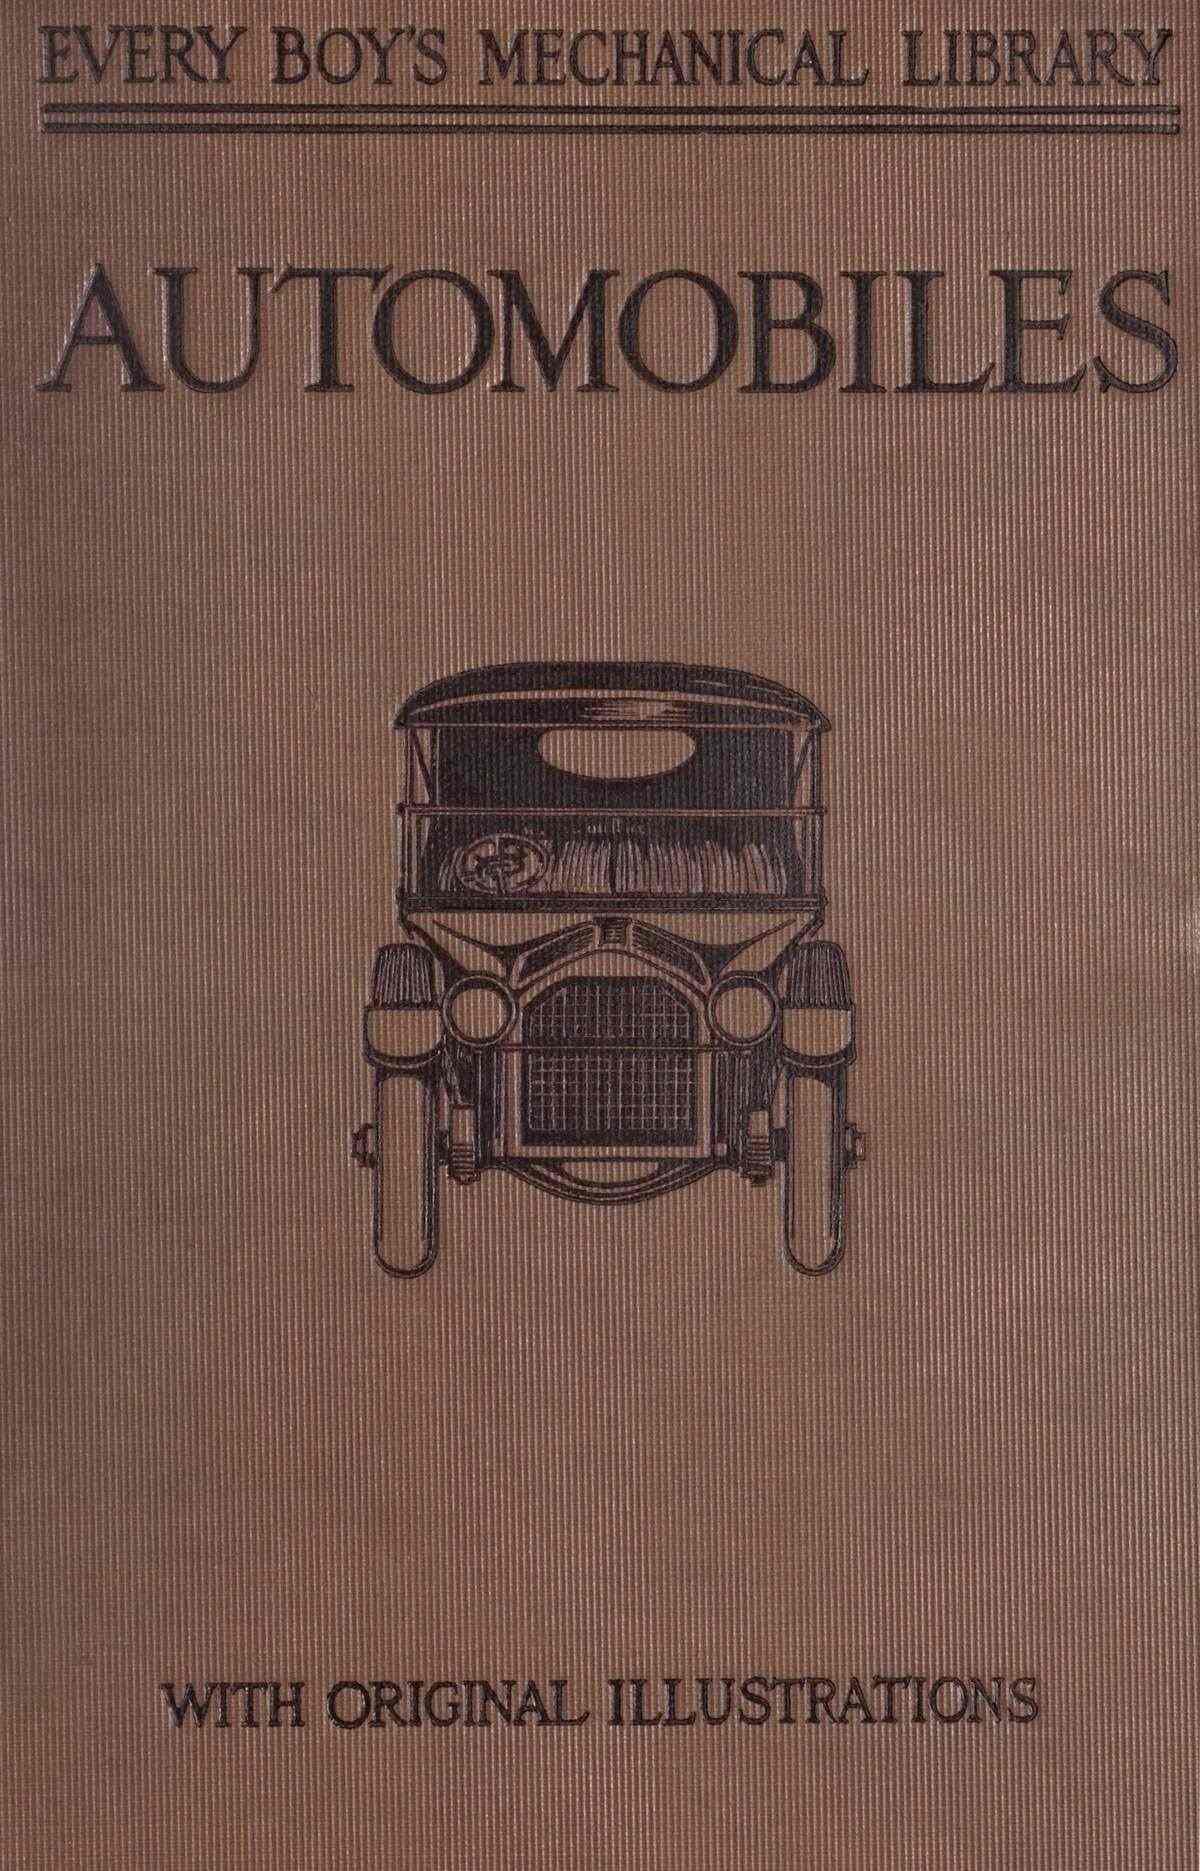 Front cover: Every Boy's Mechanical Library - Automobiles - With Original Illustrations